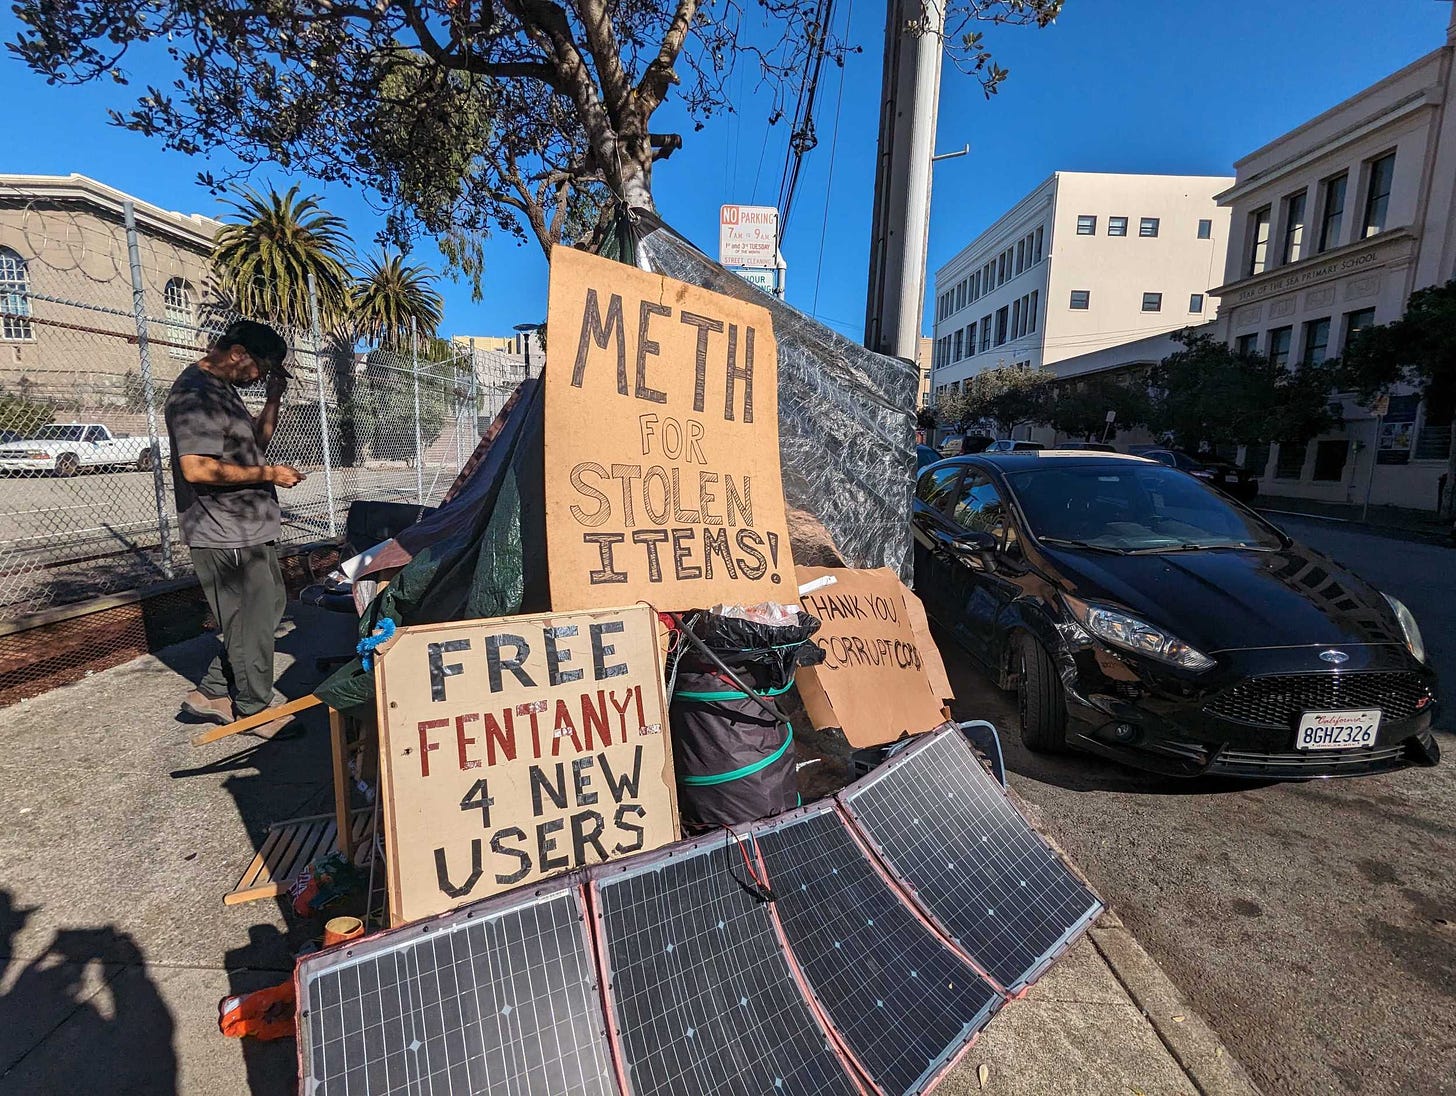 Signs reading "Meth for stolen items" and "free fentanyl 4 new users" sit atop Joseph Adam Moore's encampment on Ninth Avenue north of Geary Boulevard in San Francisco's Inner Richmond neighborhood.